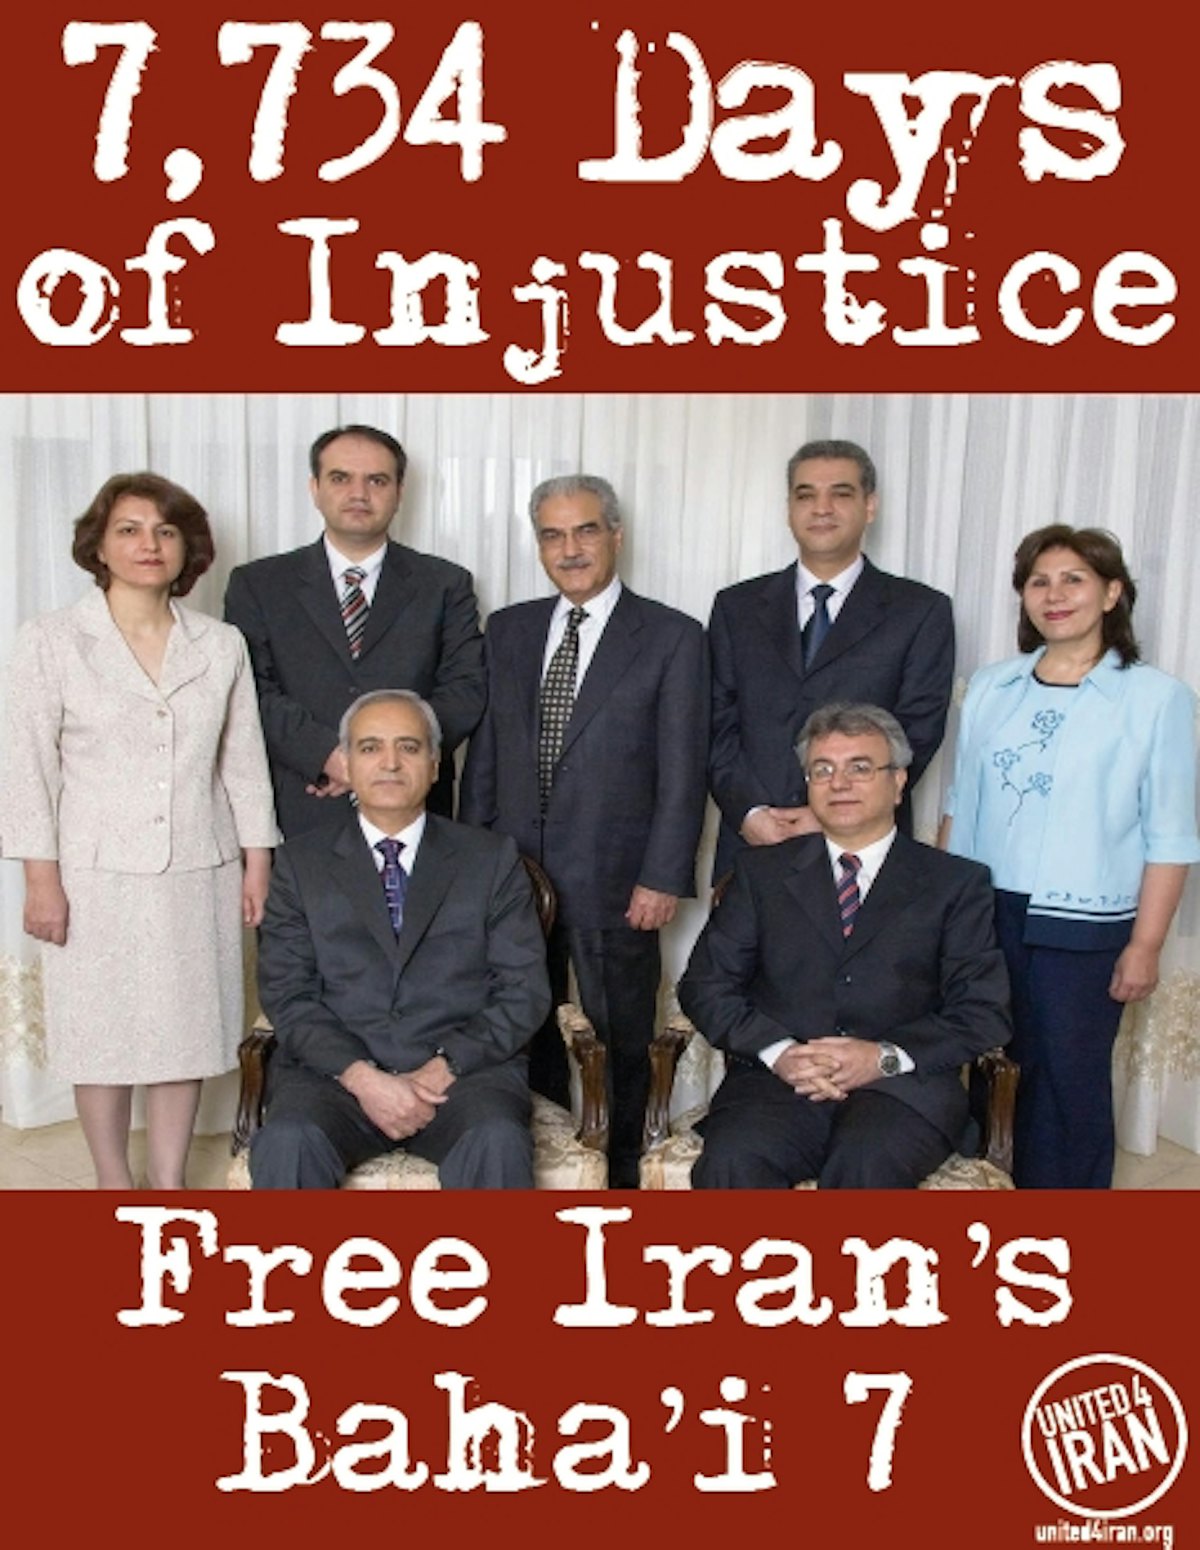 A poster, issued by the United4Iran campaign, showing the total days spent in prison by Iran's seven Baha'i leaders at the conclusion of their third year. The campaign calls upon supporters to make their own posters indicating the number of days of imprisonment, or to take a picture or video holding this pre-prepared poster.